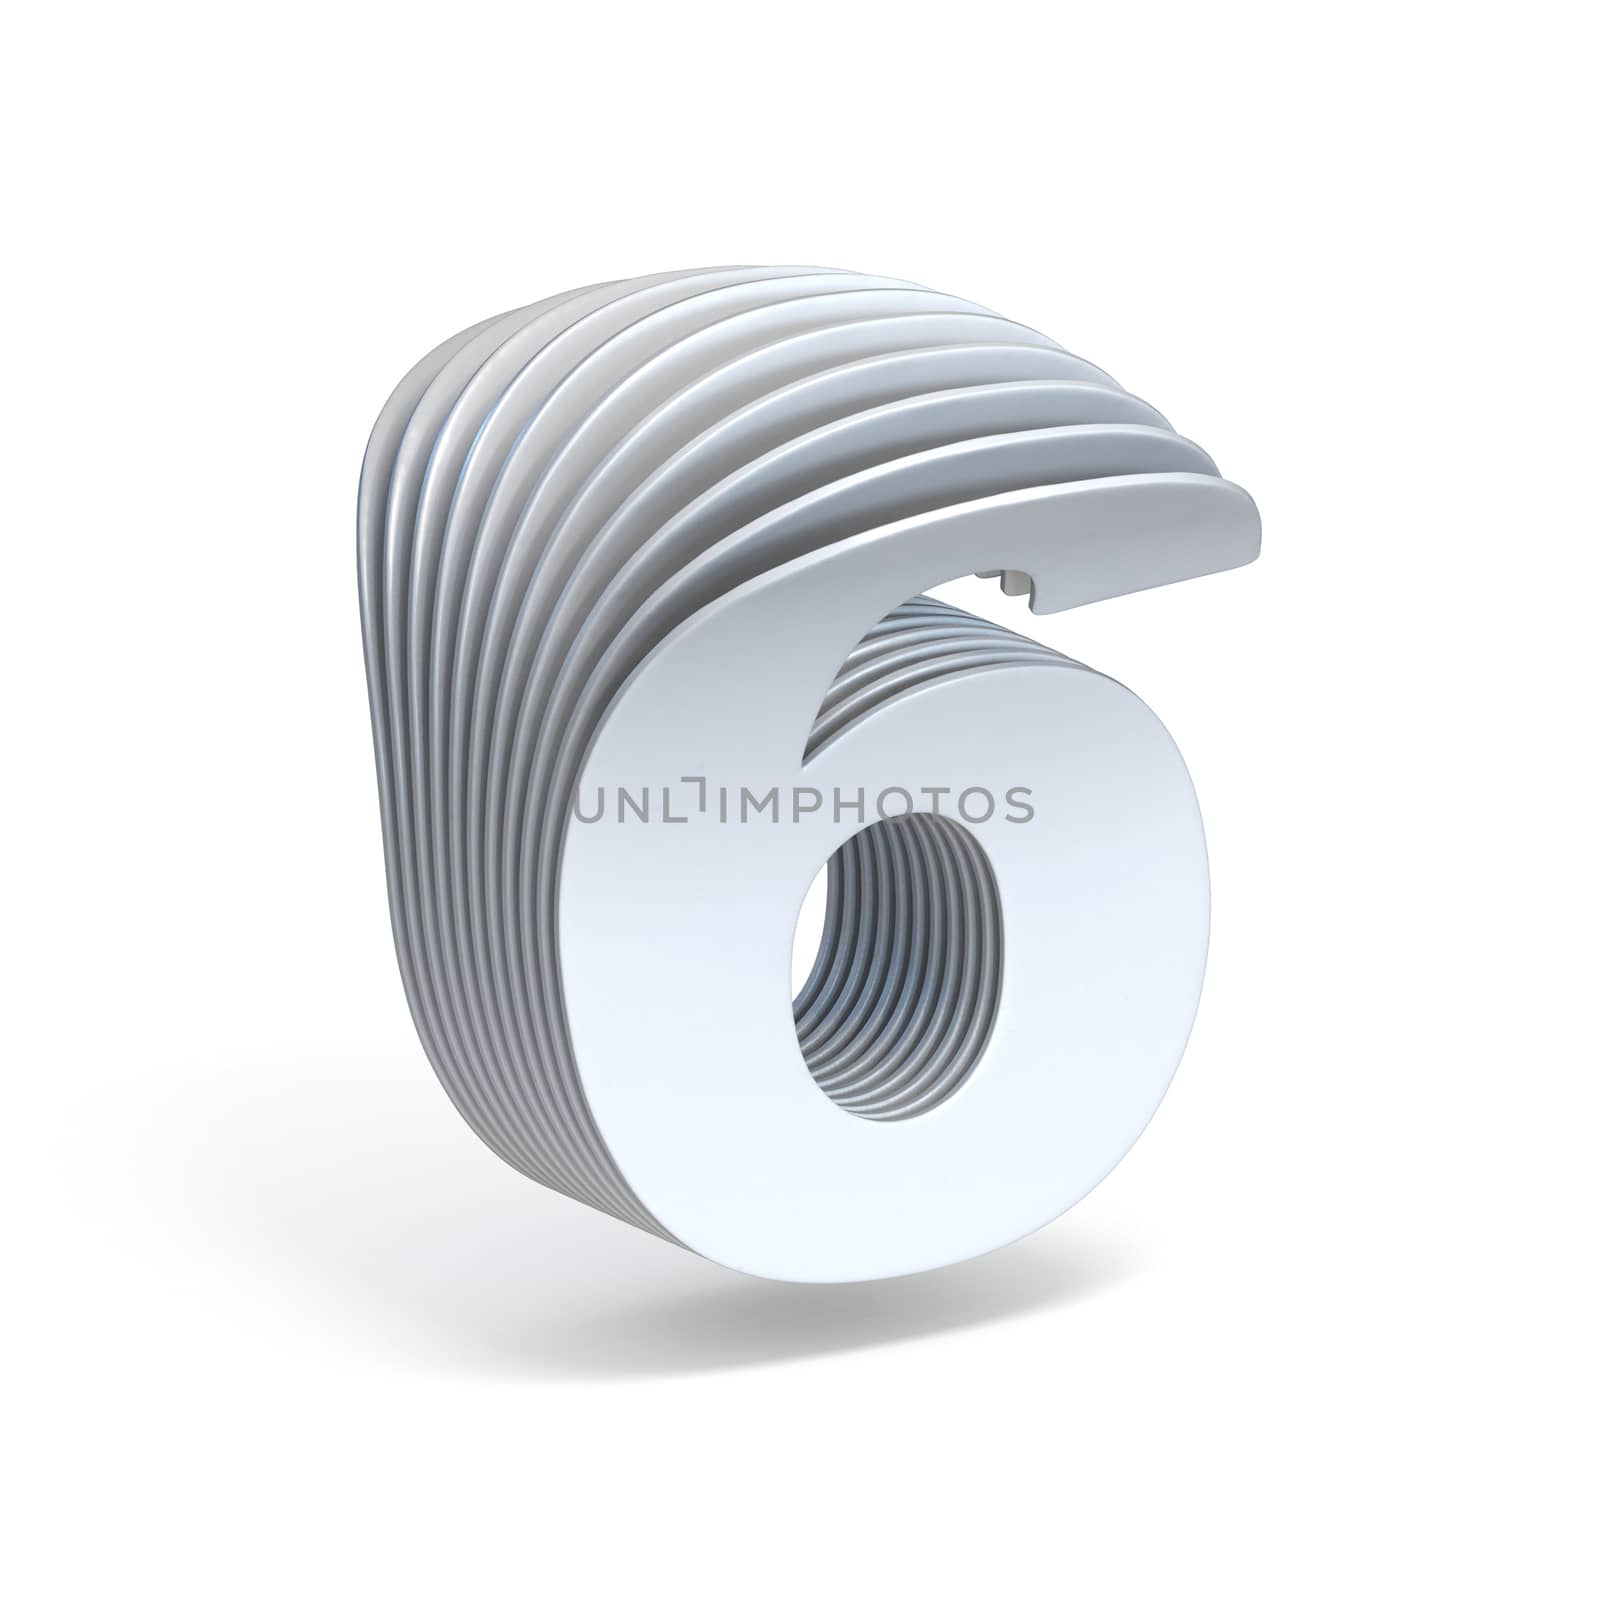 Curved paper sheets Number 6 SIX 3D render illustration isolated on white background